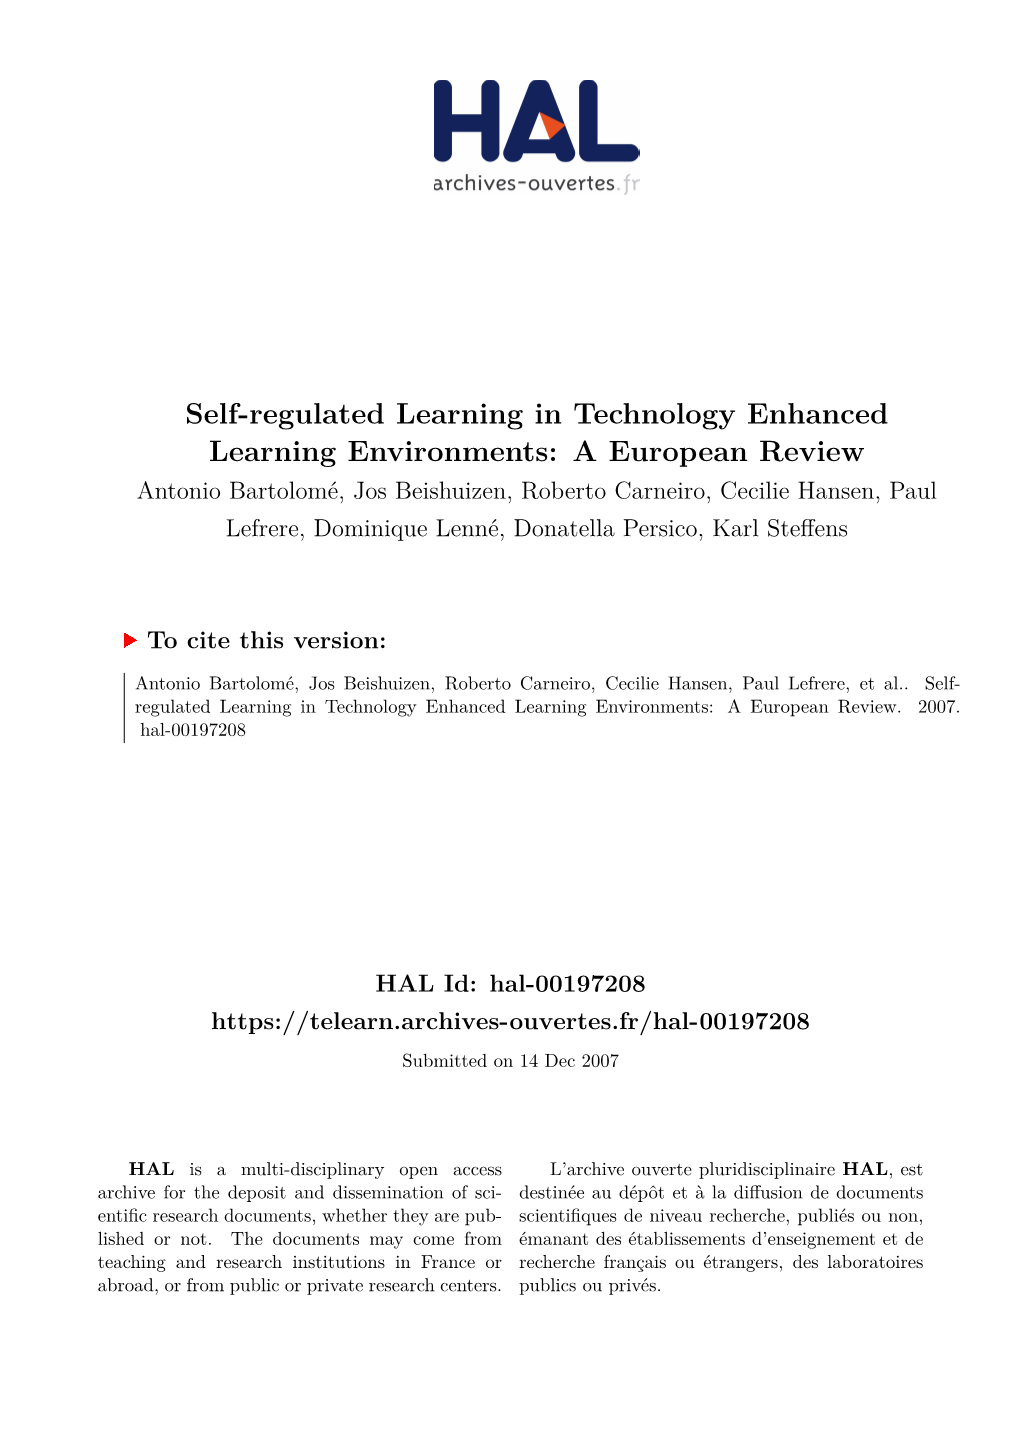 Self-Regulated Learning in Technology Enhanced Learning